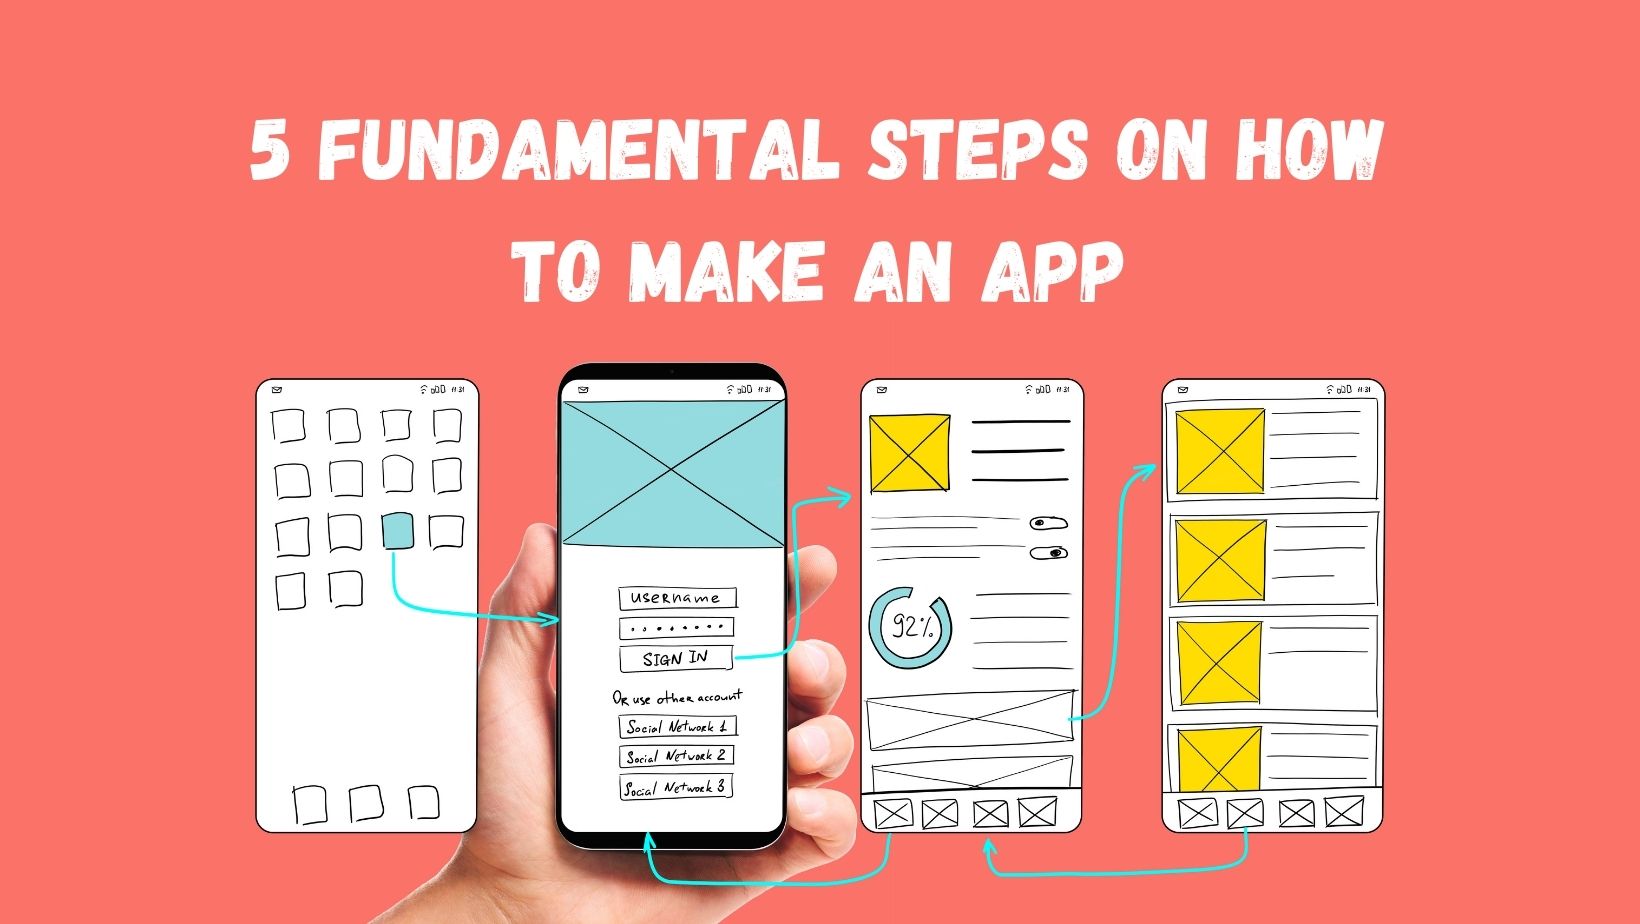 How To Use & APP